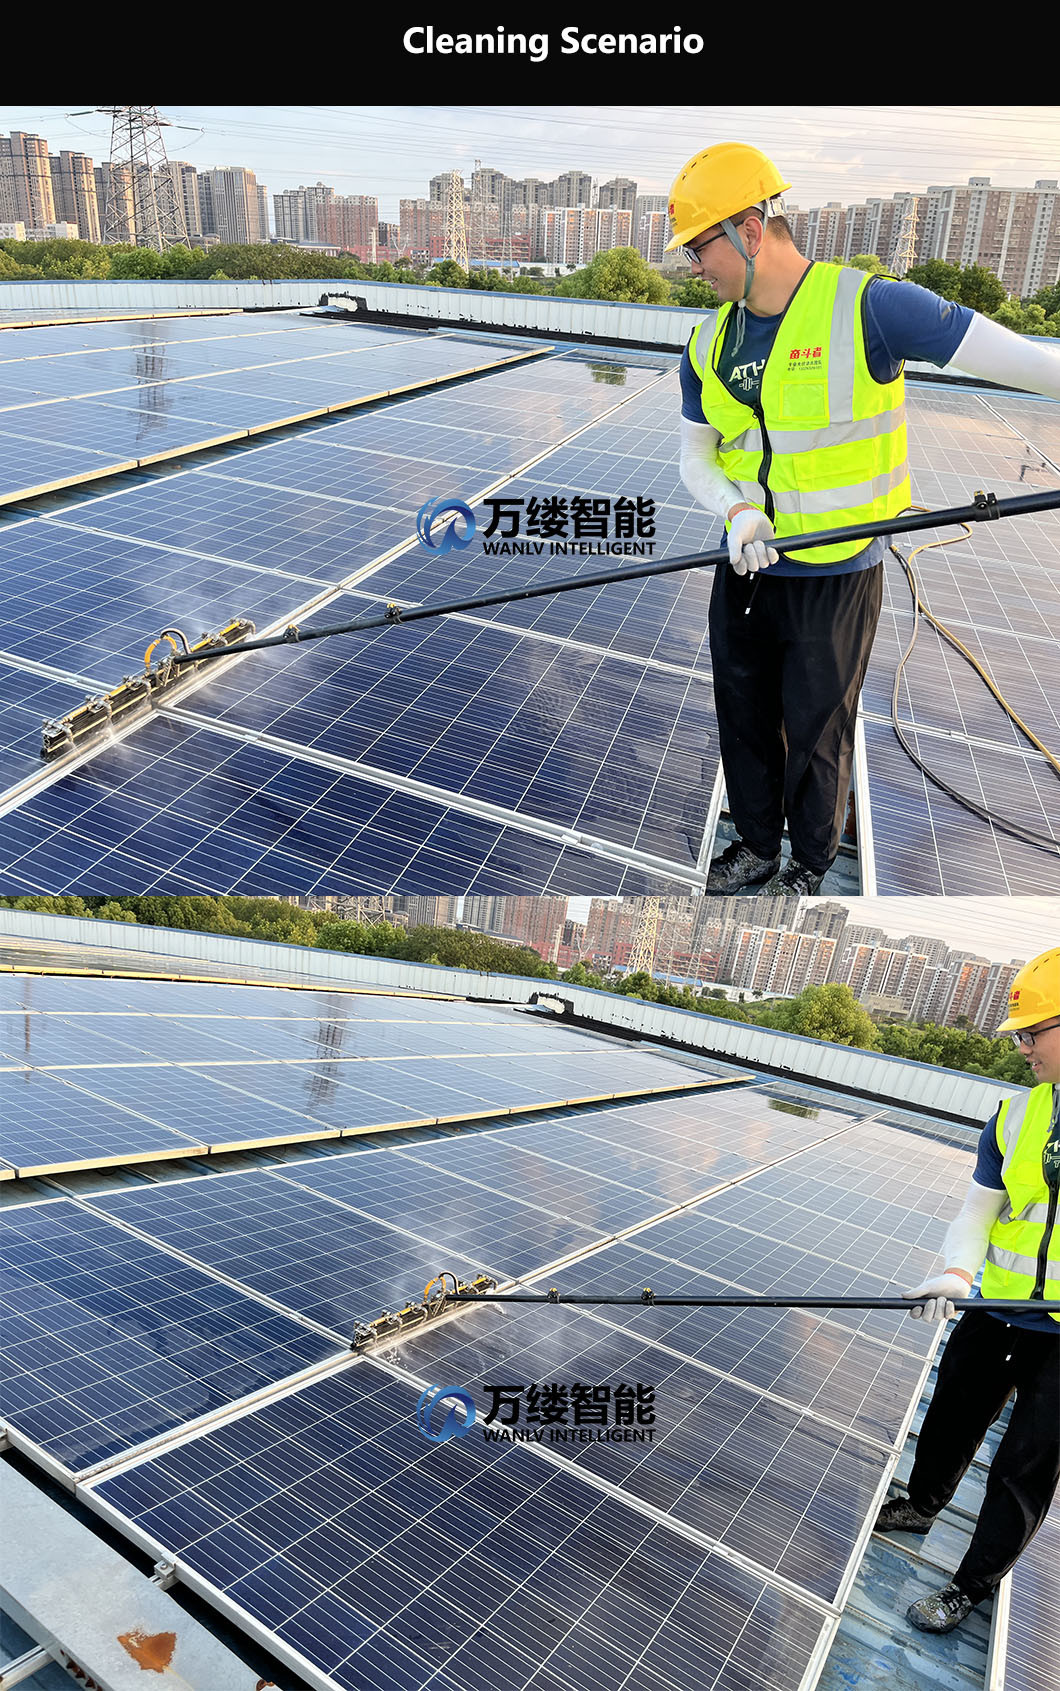 High Water Pressure and Volume Solar Panel Cleaning Equipment Reliable Cleaning Brush with 3.5m 5.5m 7.5m Telescopic Pole/Rod for Dust and Debris Removal